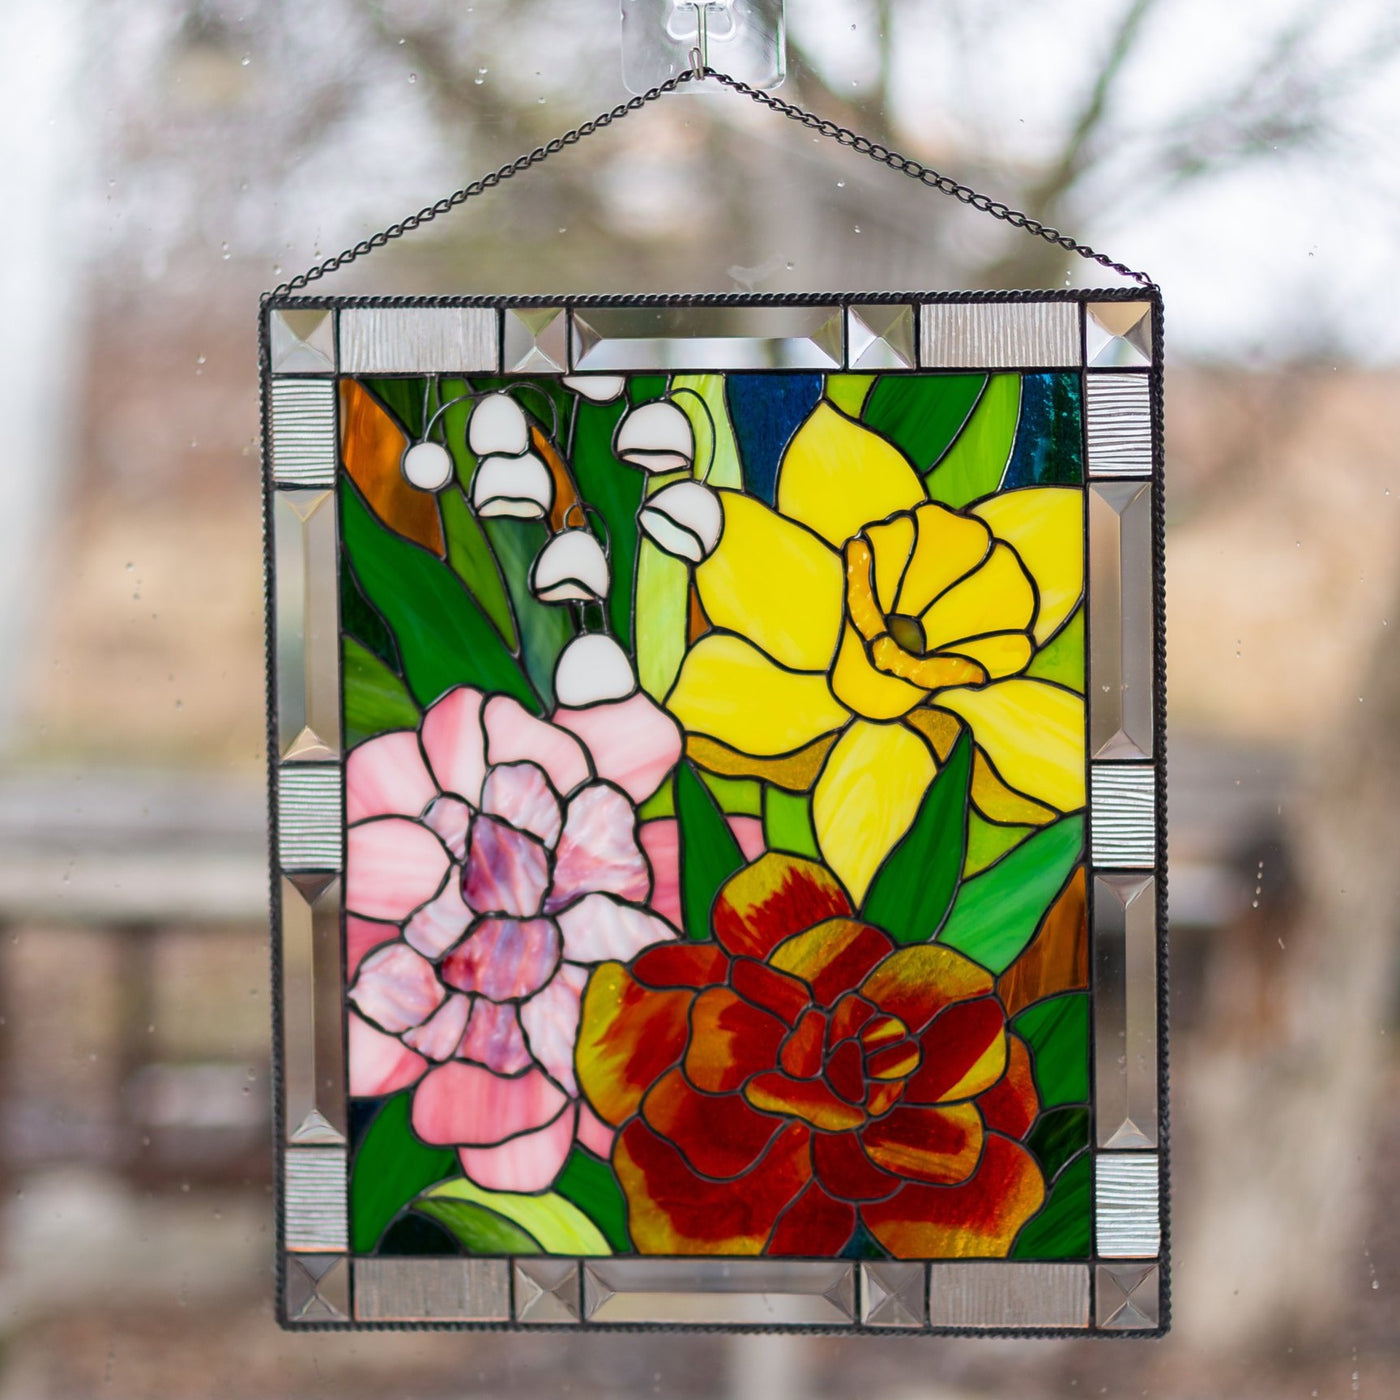 Marigold, daffodil, carnation and lily panel of stained glass